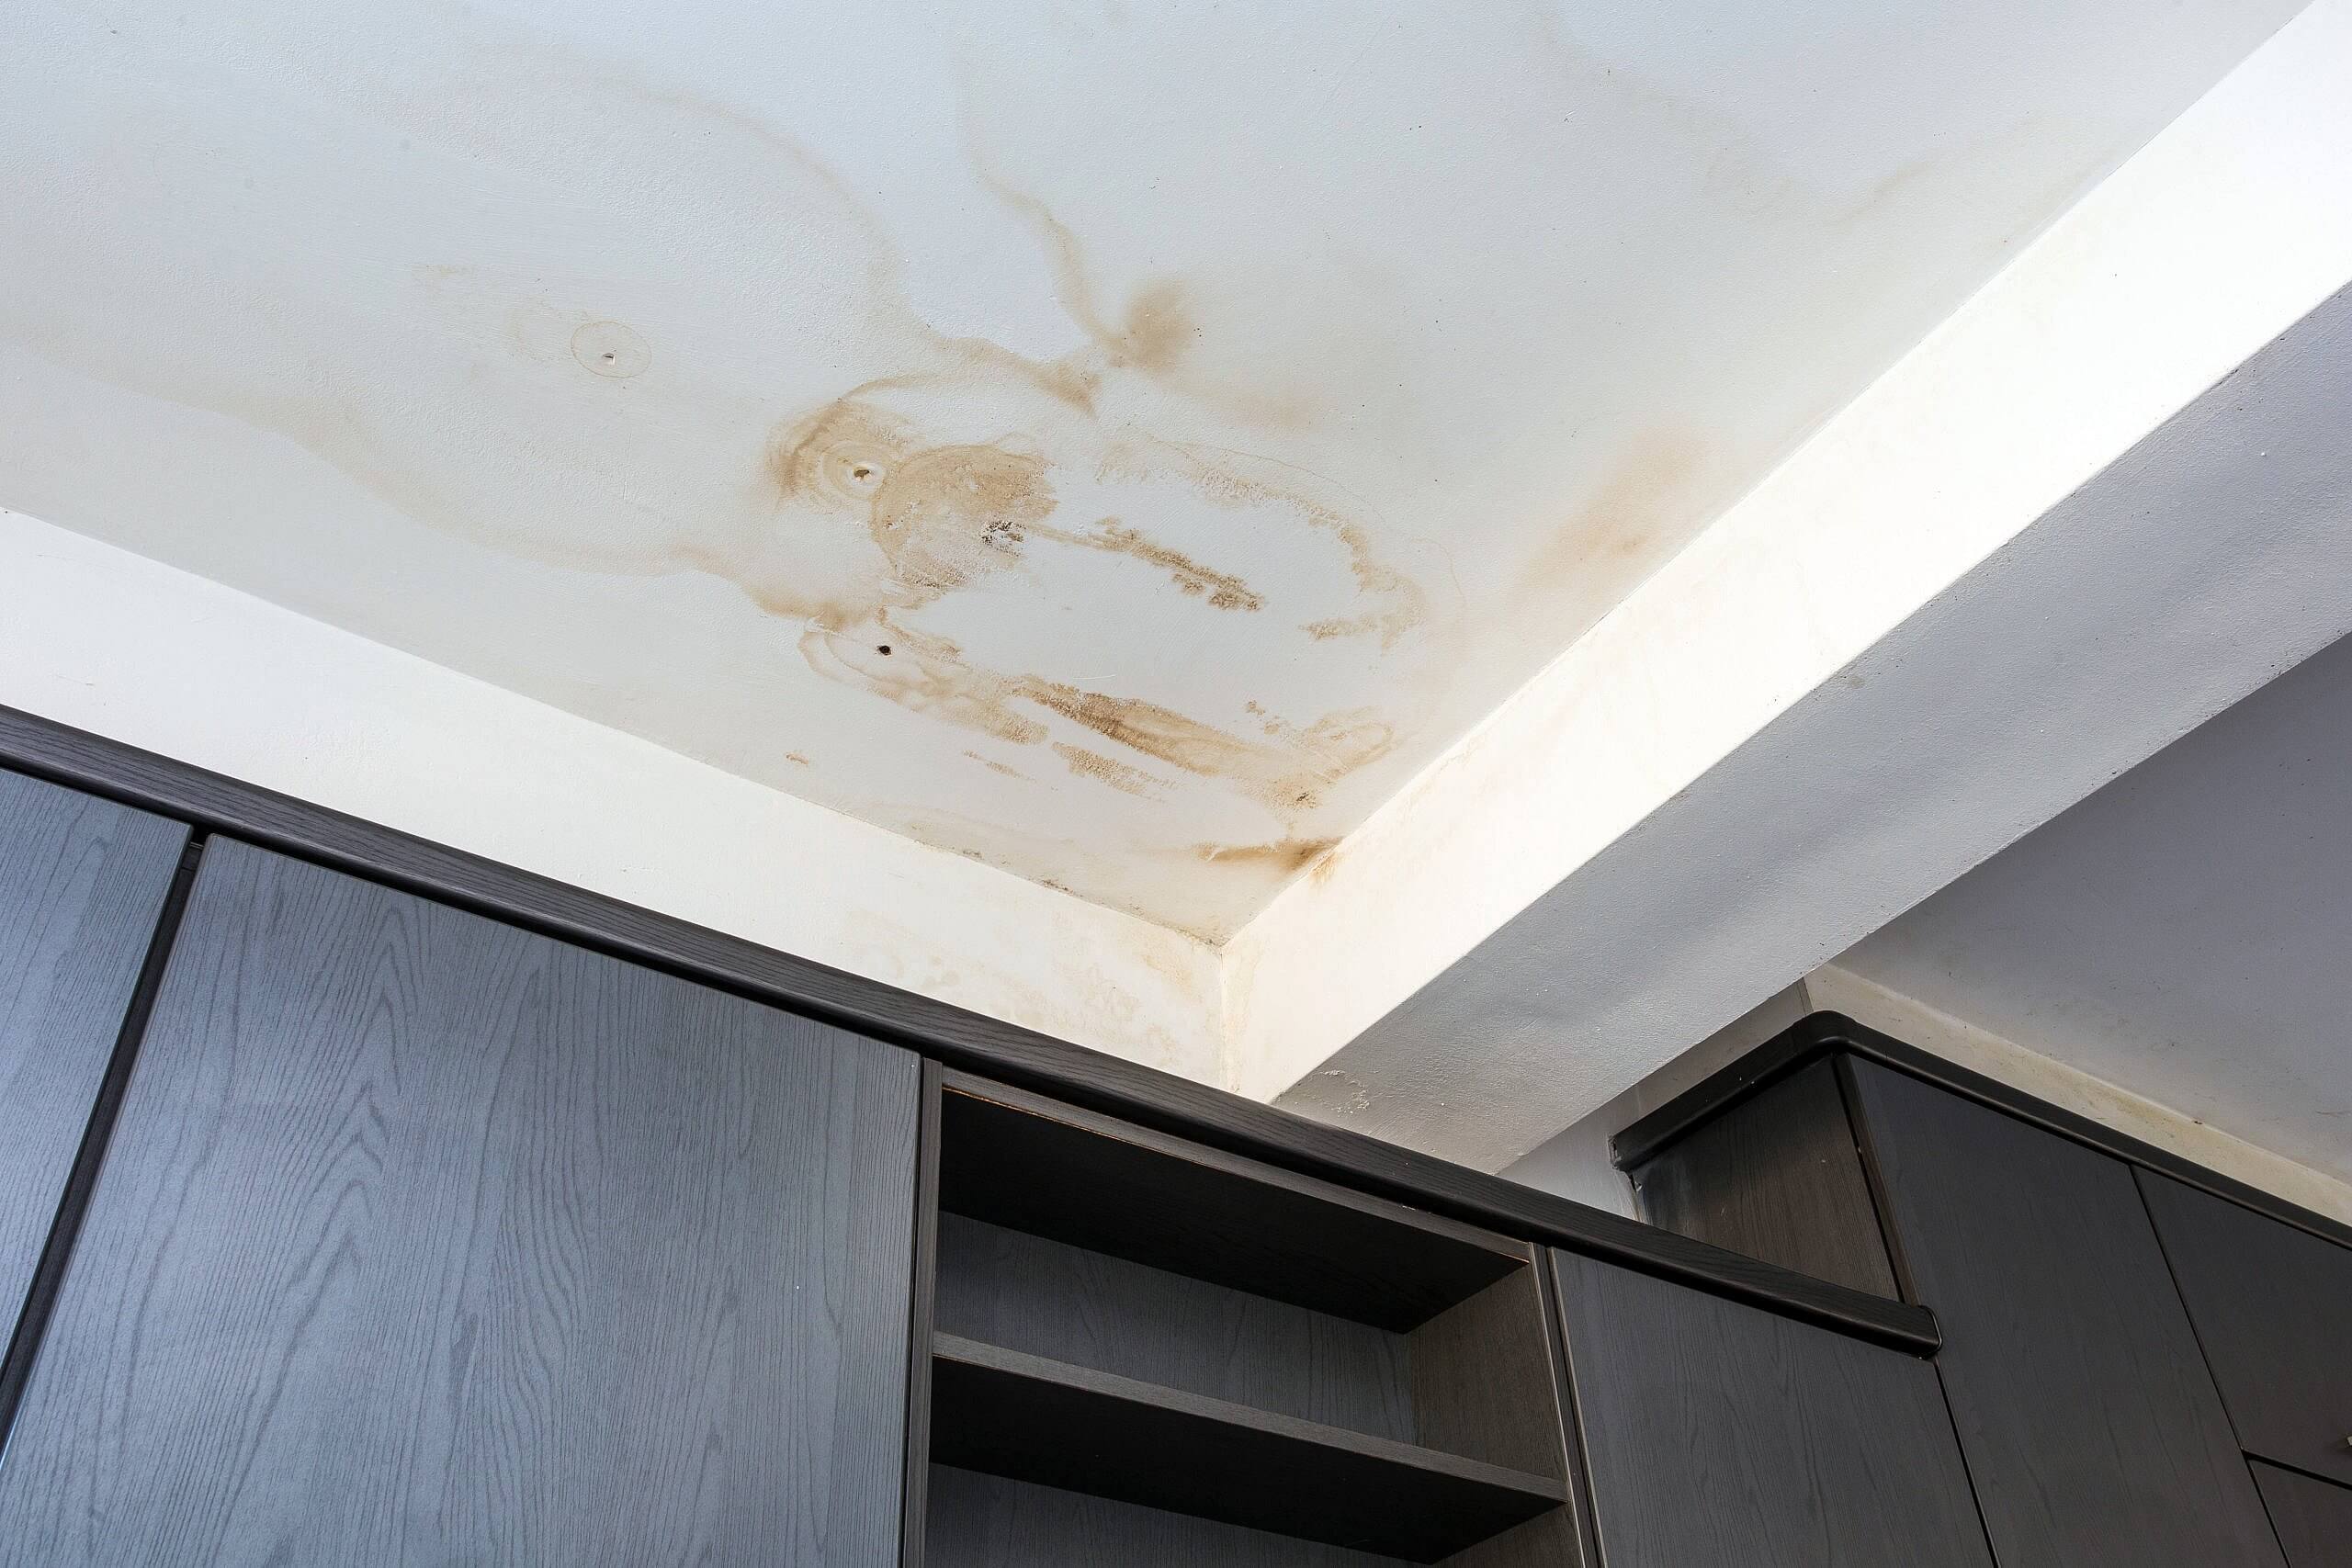 Water damage on a property's ceiling.